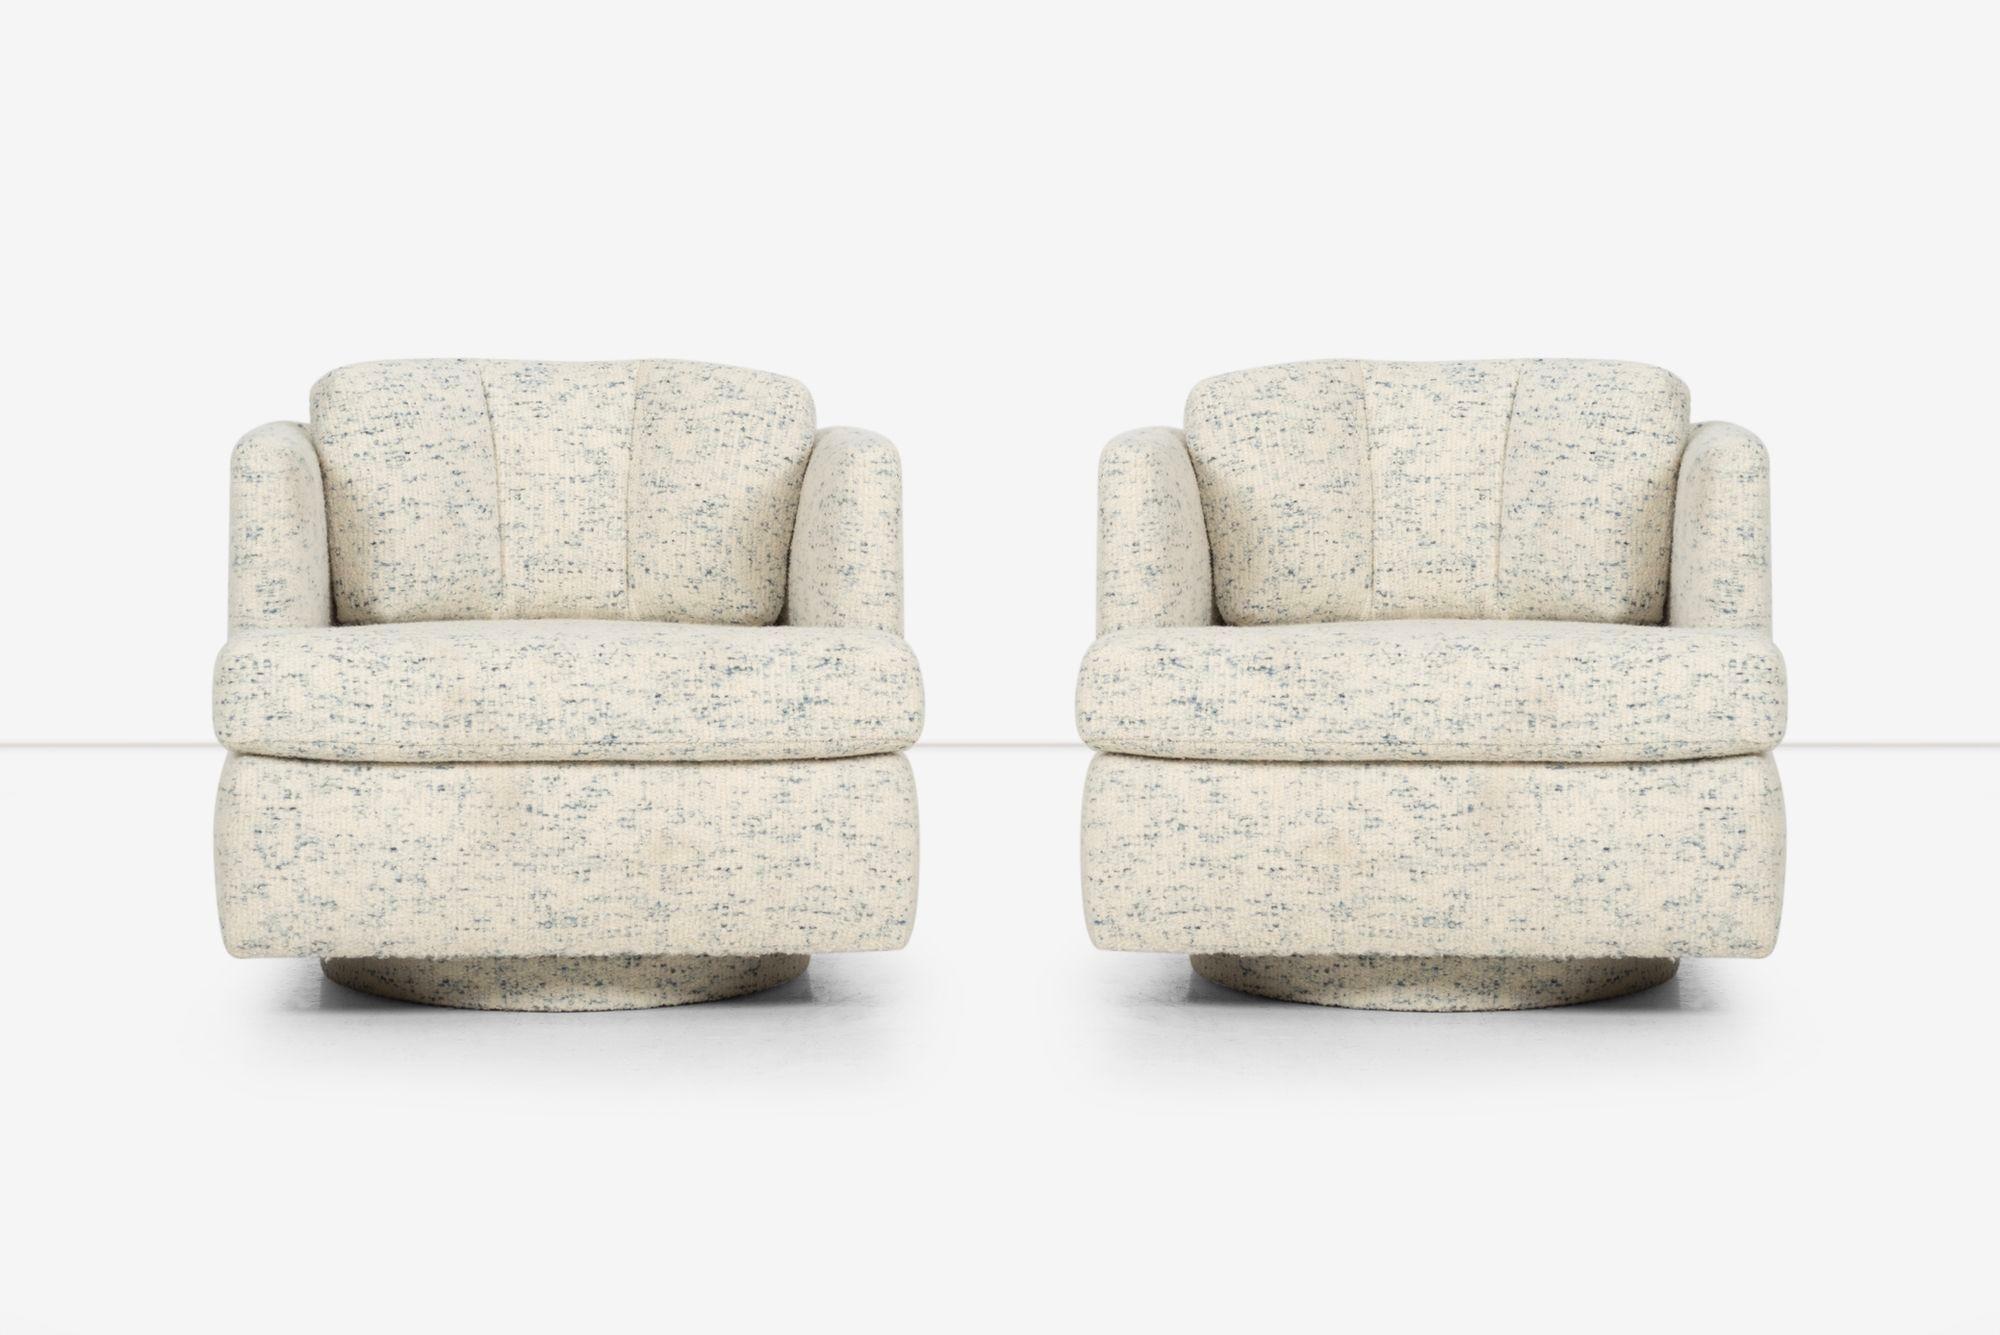 Pair of Attributed to Harvey Probber Hexagonal Swivel Lounge Chairs, These chairs feature an Irregular Hexagon shape with six sides of different lengths, with a pillow back. They have been expertly reupholstered with textured cotton-poly Great